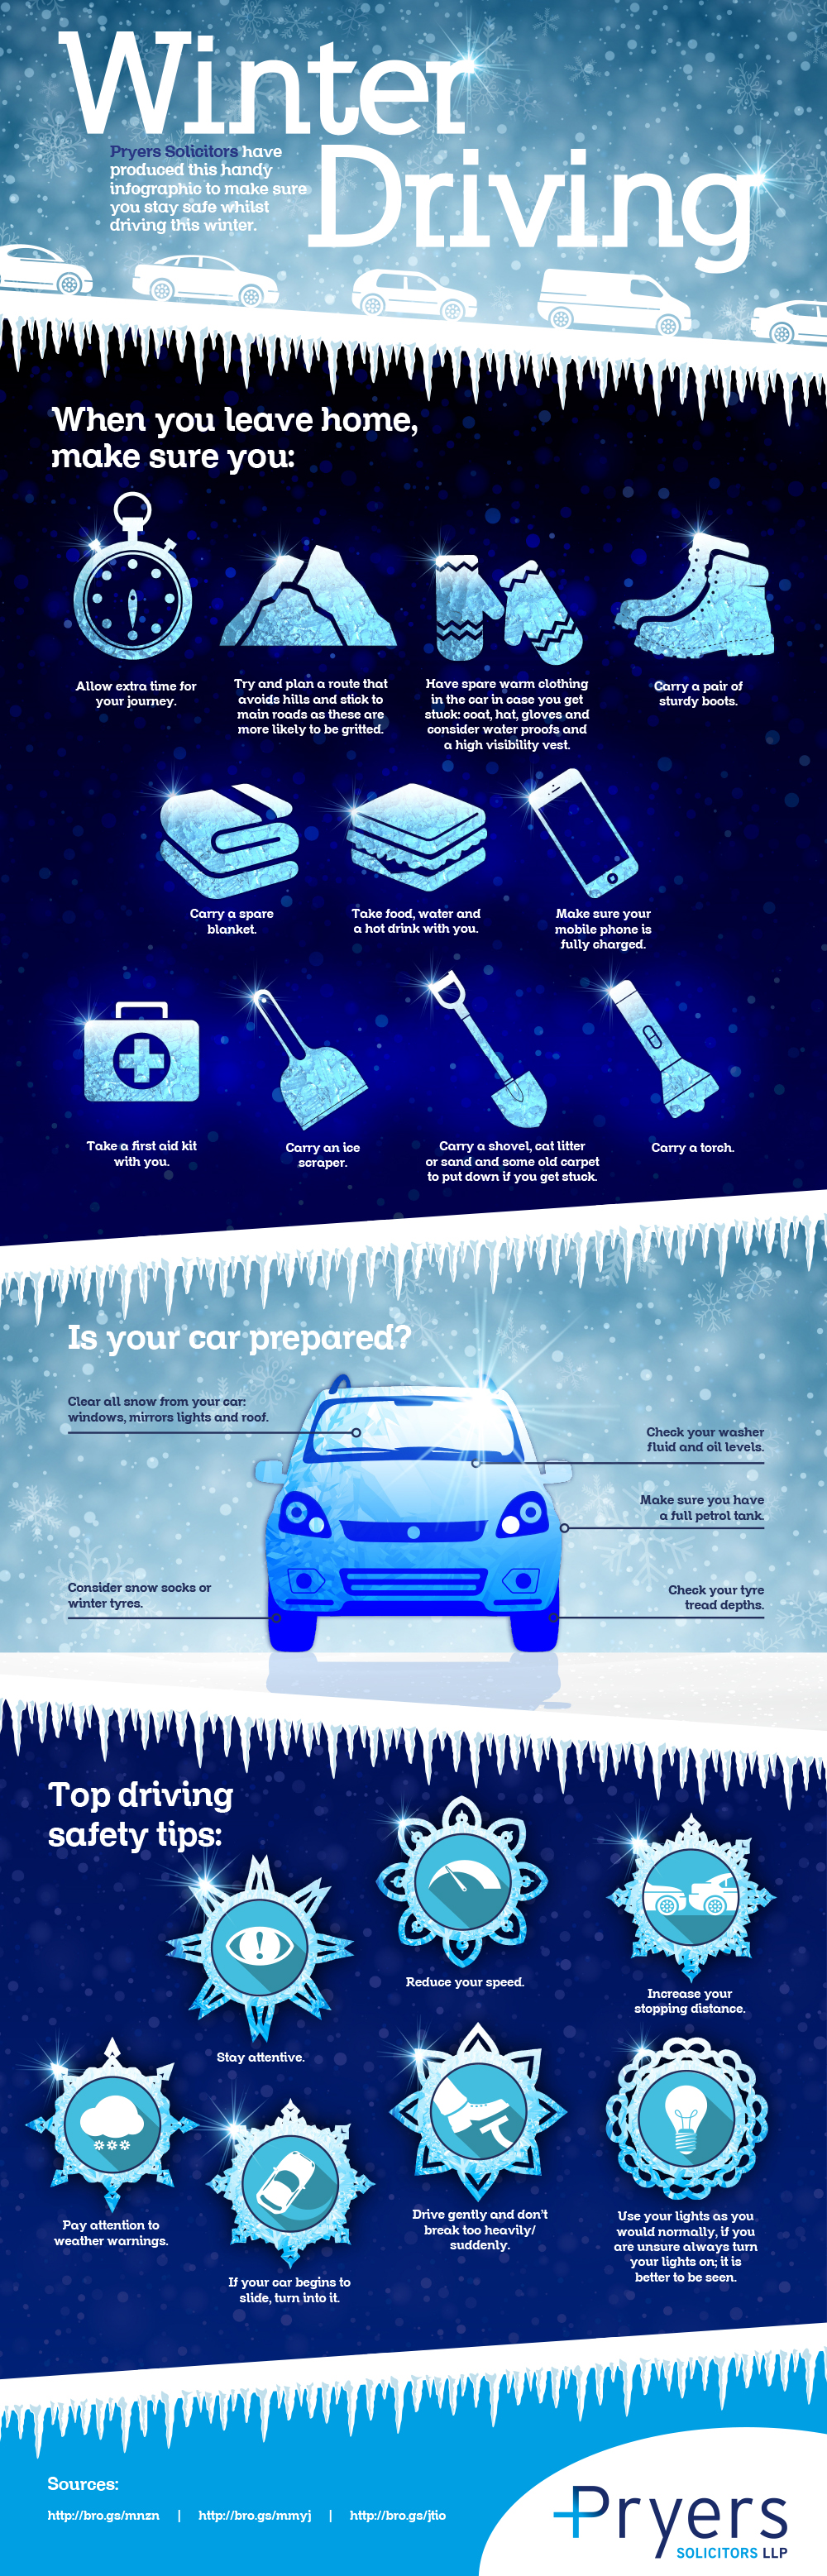 winter driving infographic